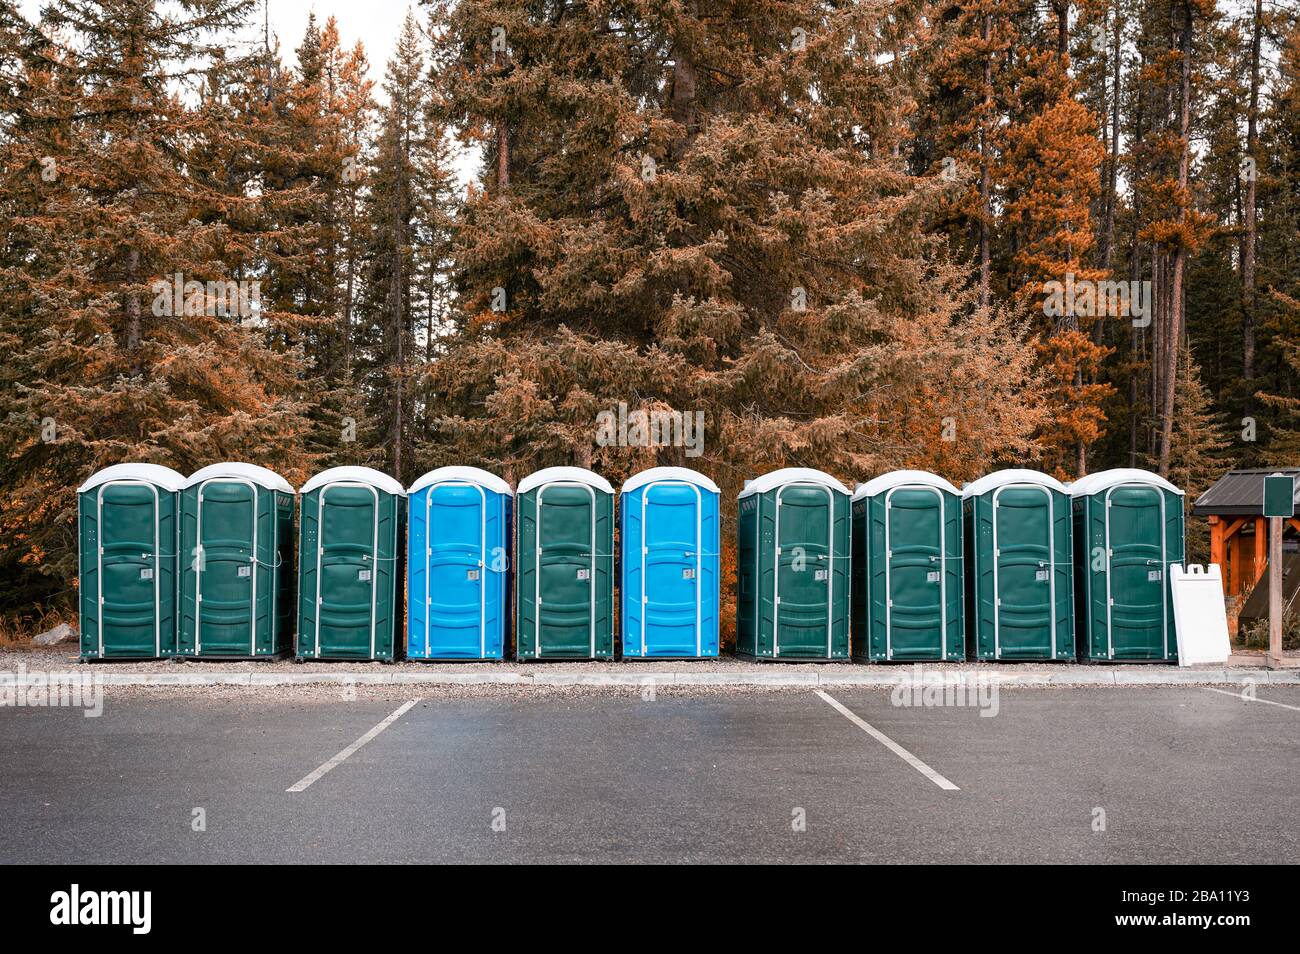 Row of green, blue portable chemical toilets in autumn forest at national park Stock Photo